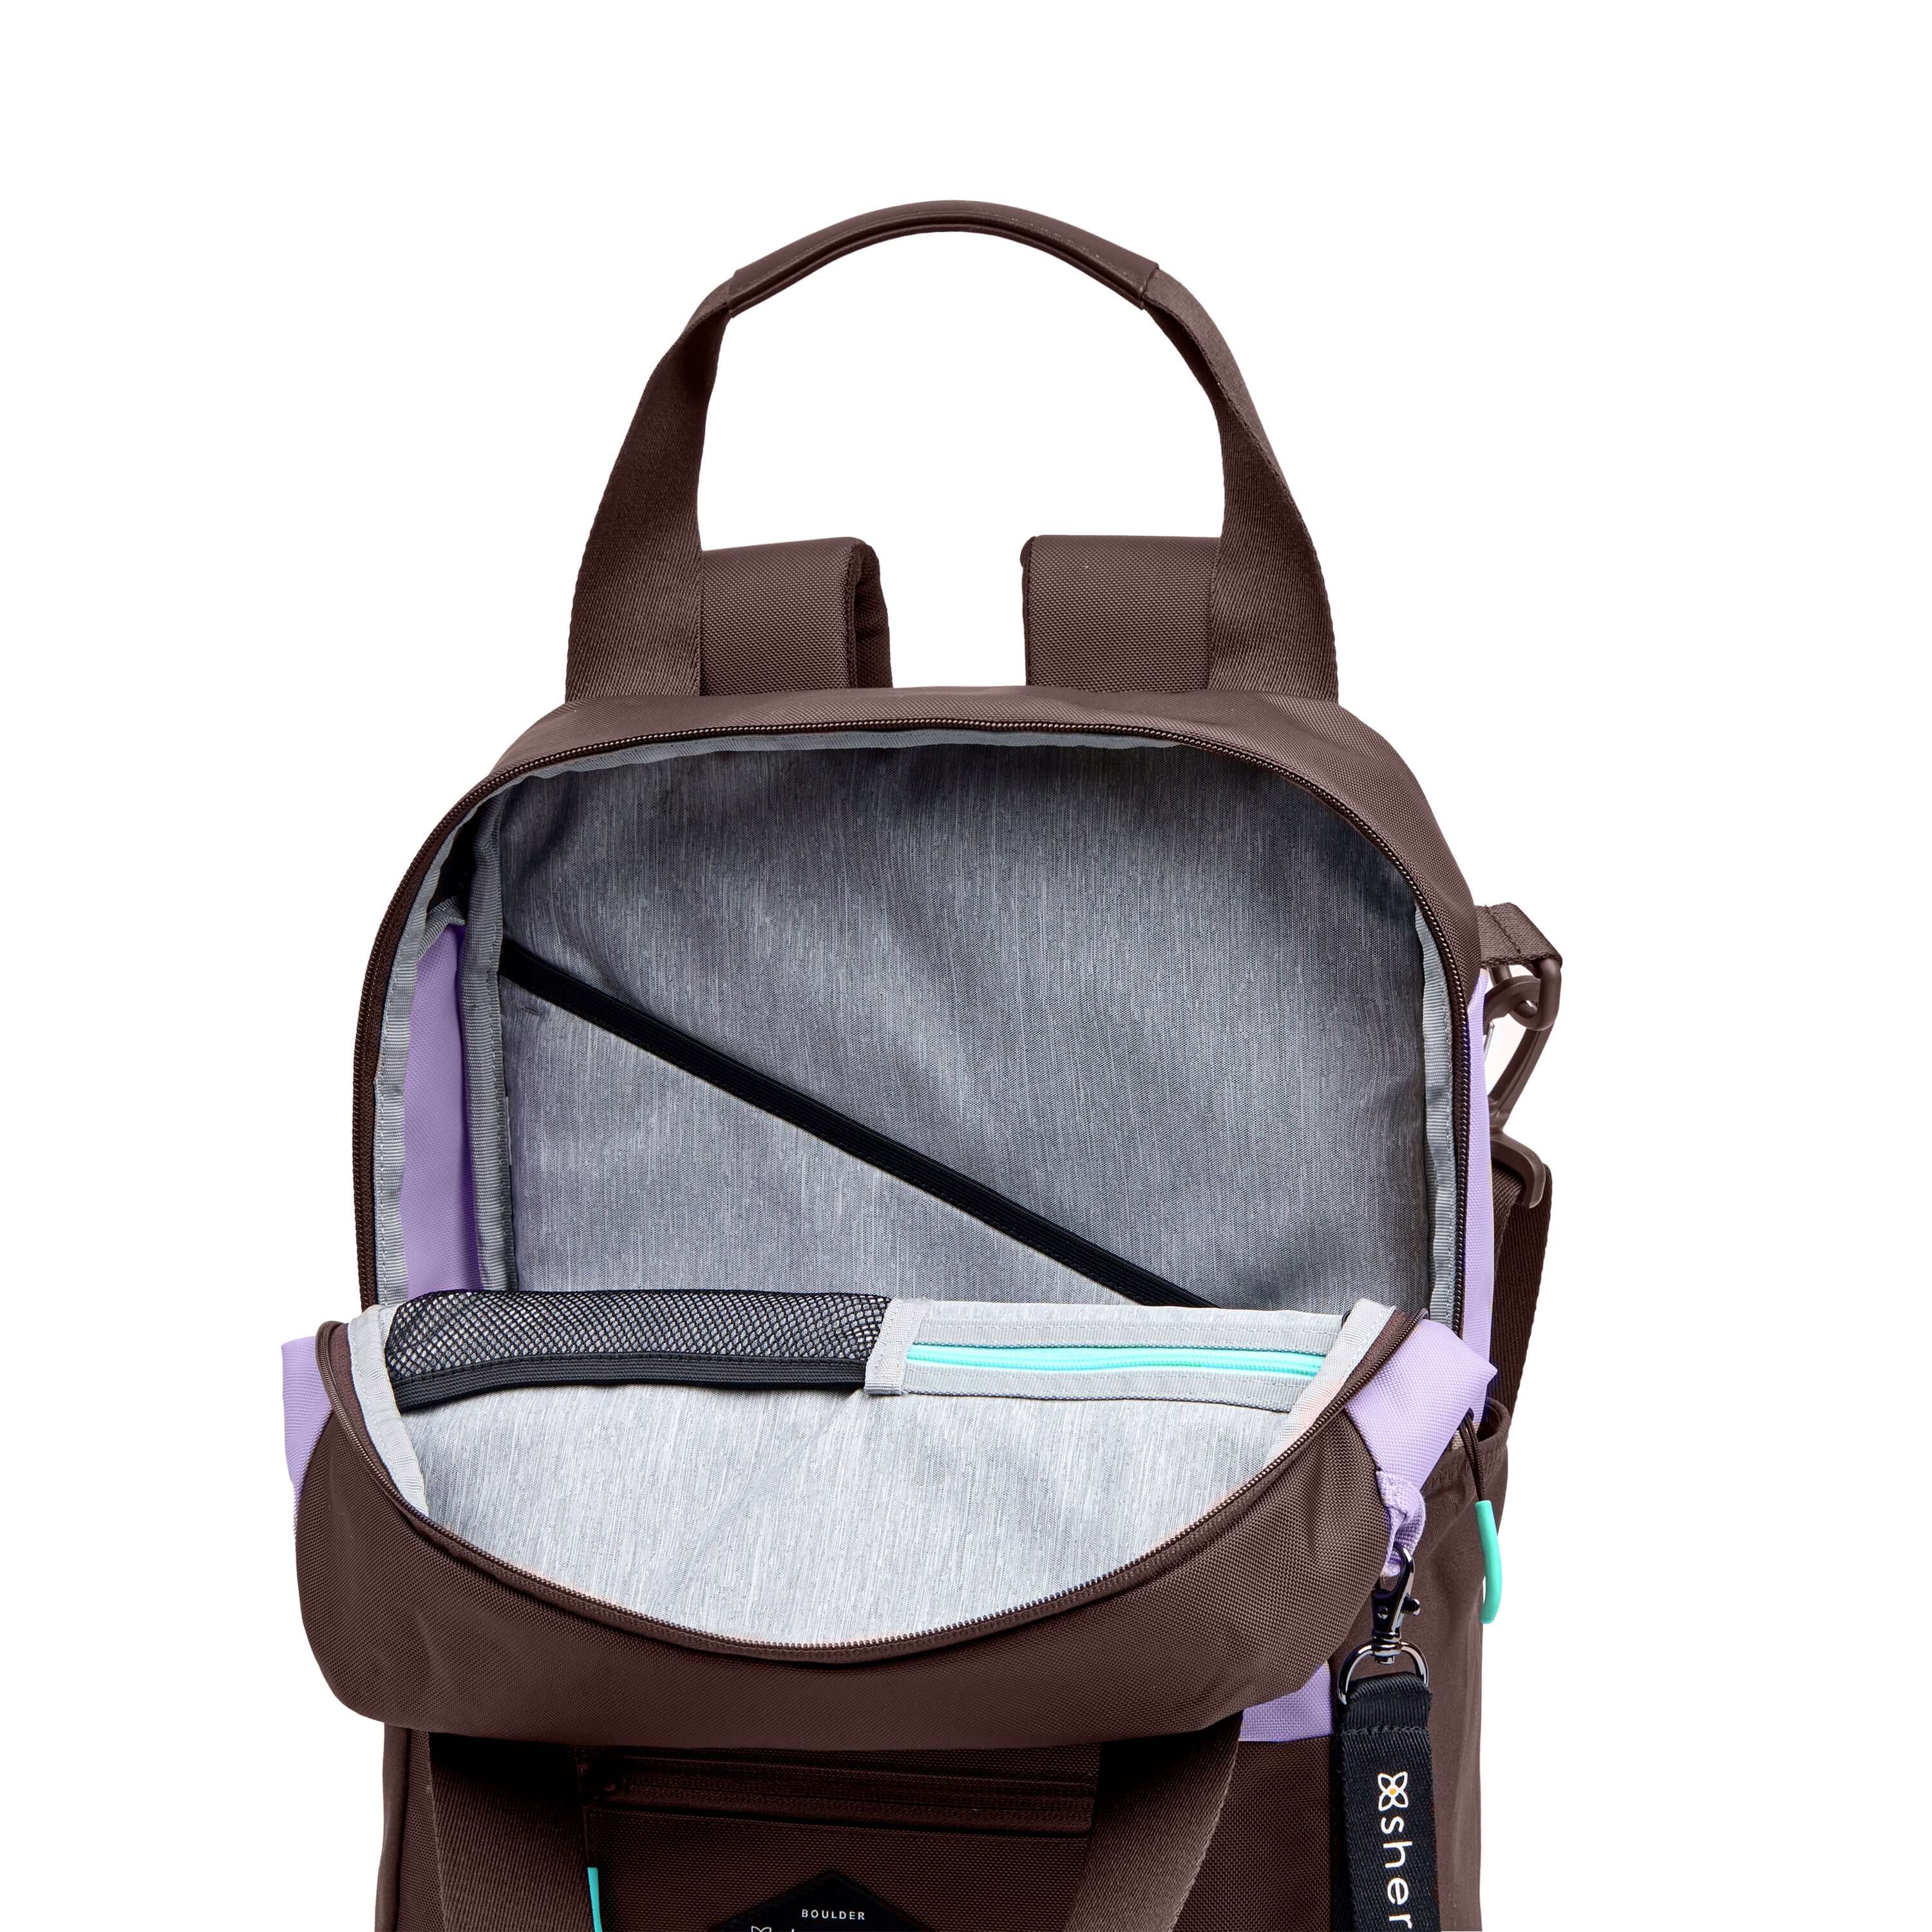 Front view of Sherpani's three-in-one bag, the Camden in Lavender. The main zipper compartment is open to reveal a light gray interior with a padded laptop sleeve, zipper pocket and mesh pocket. 